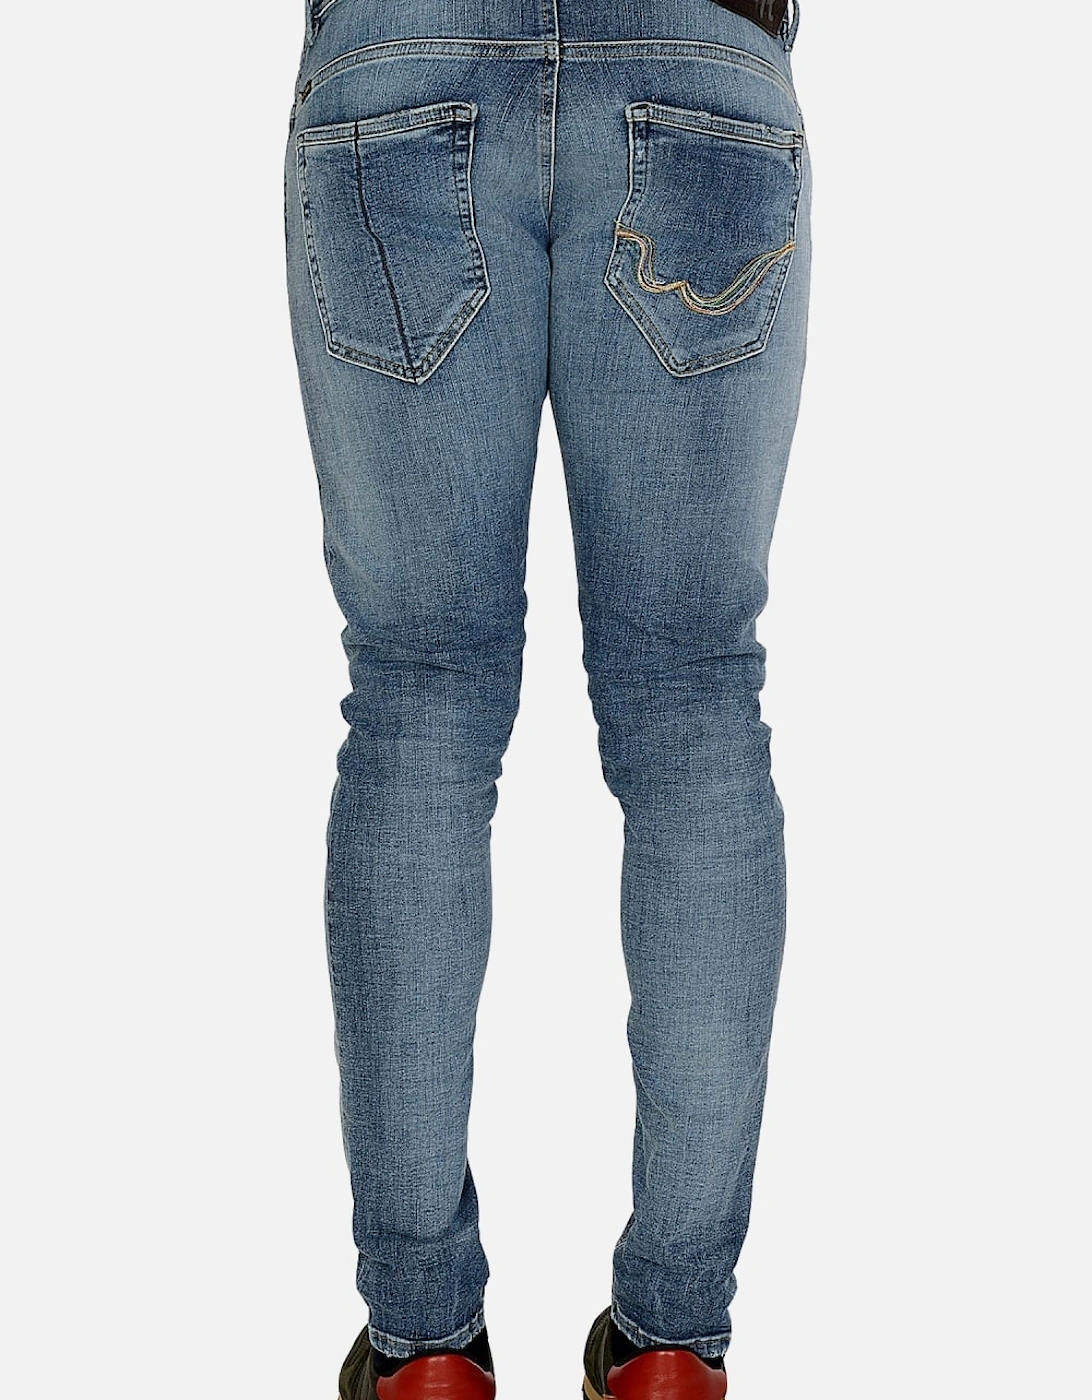 'WE R REPLAY' EDTION JEANS